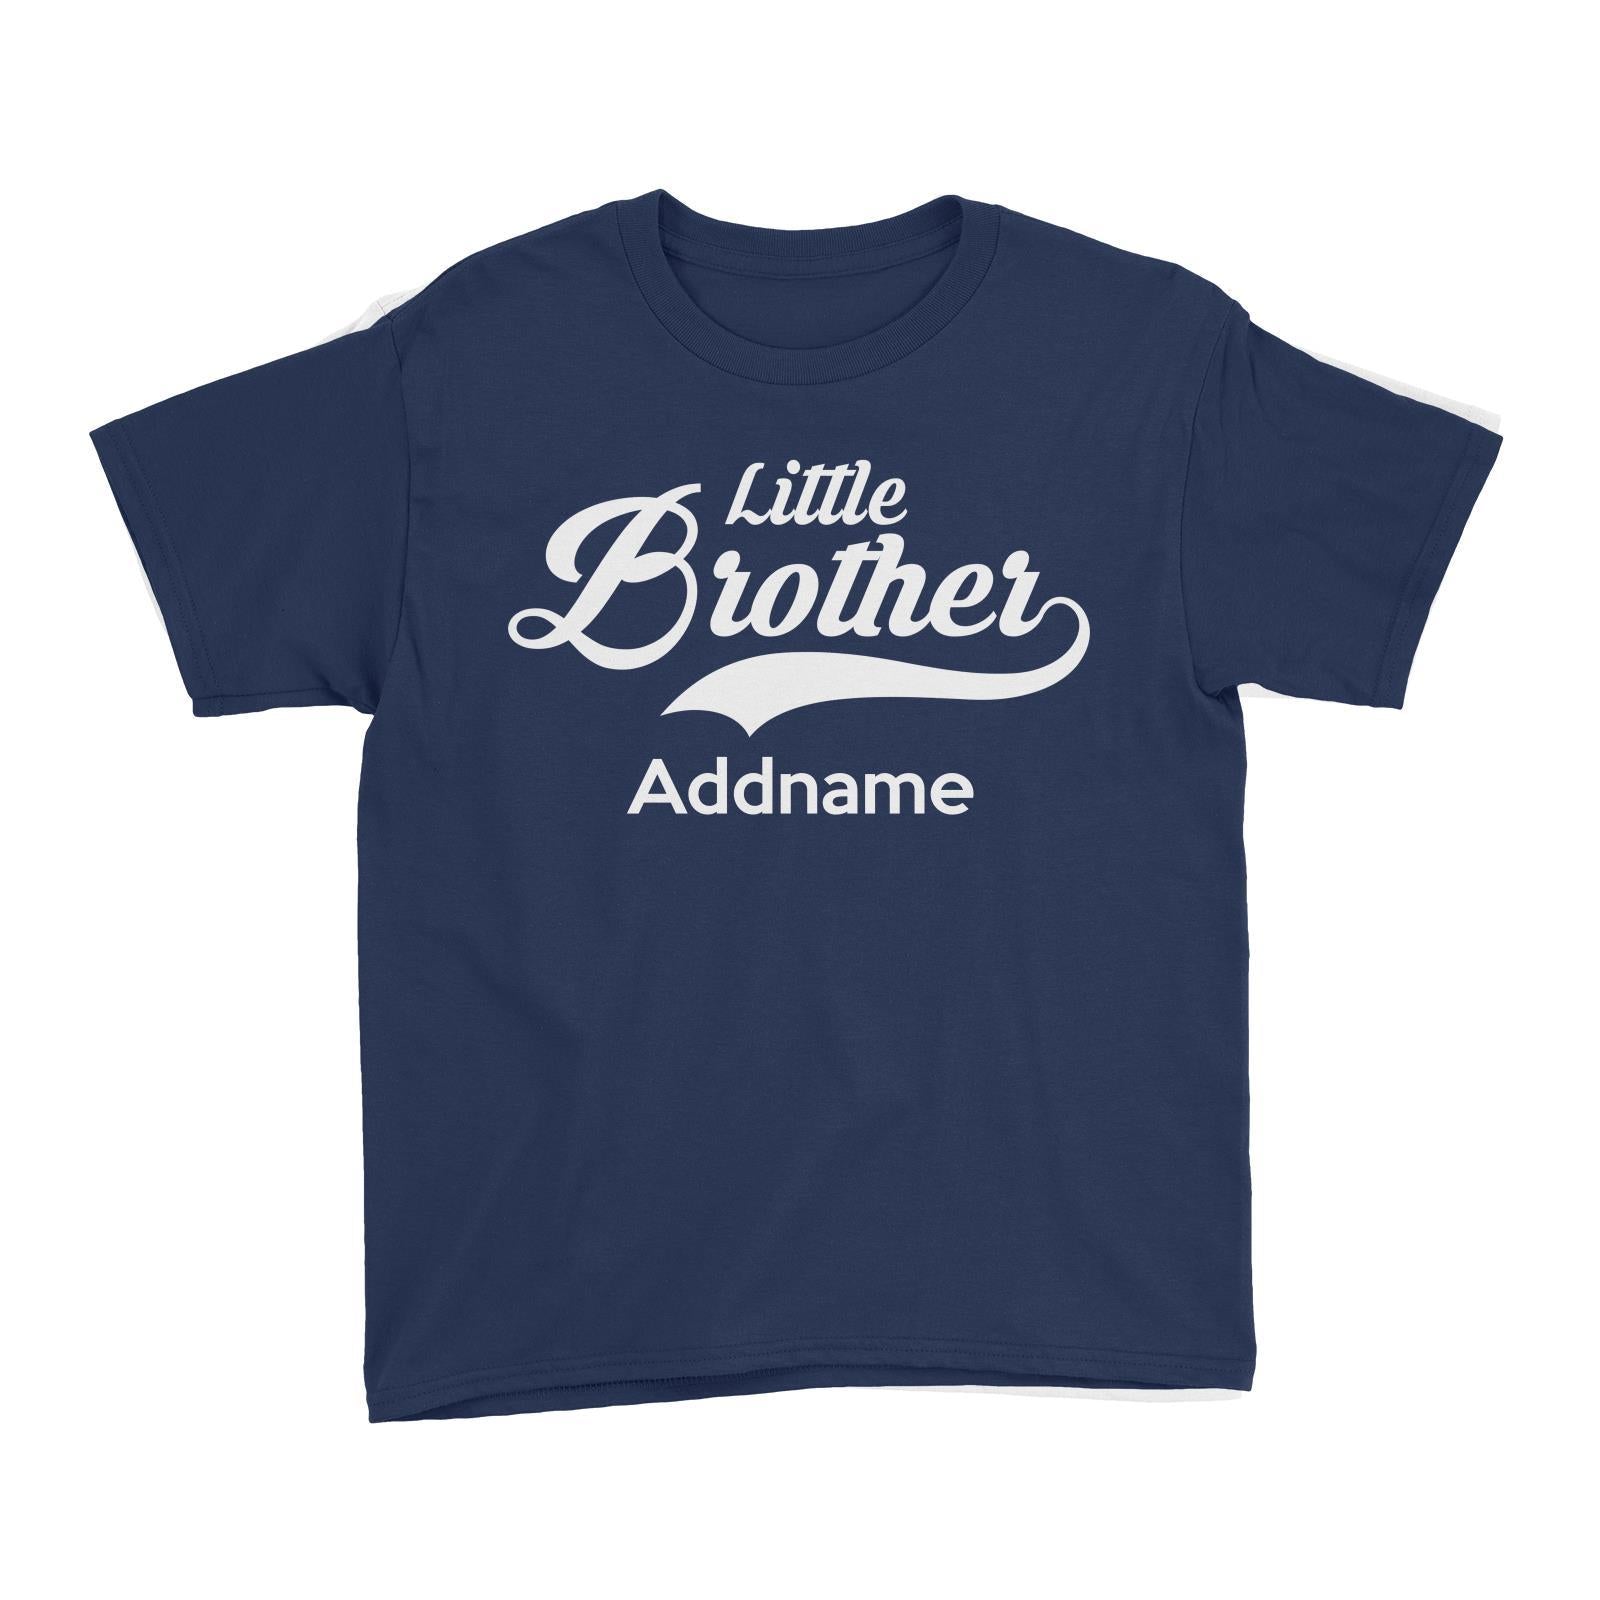 Retro Little Brother Addname Kid's T-Shirt